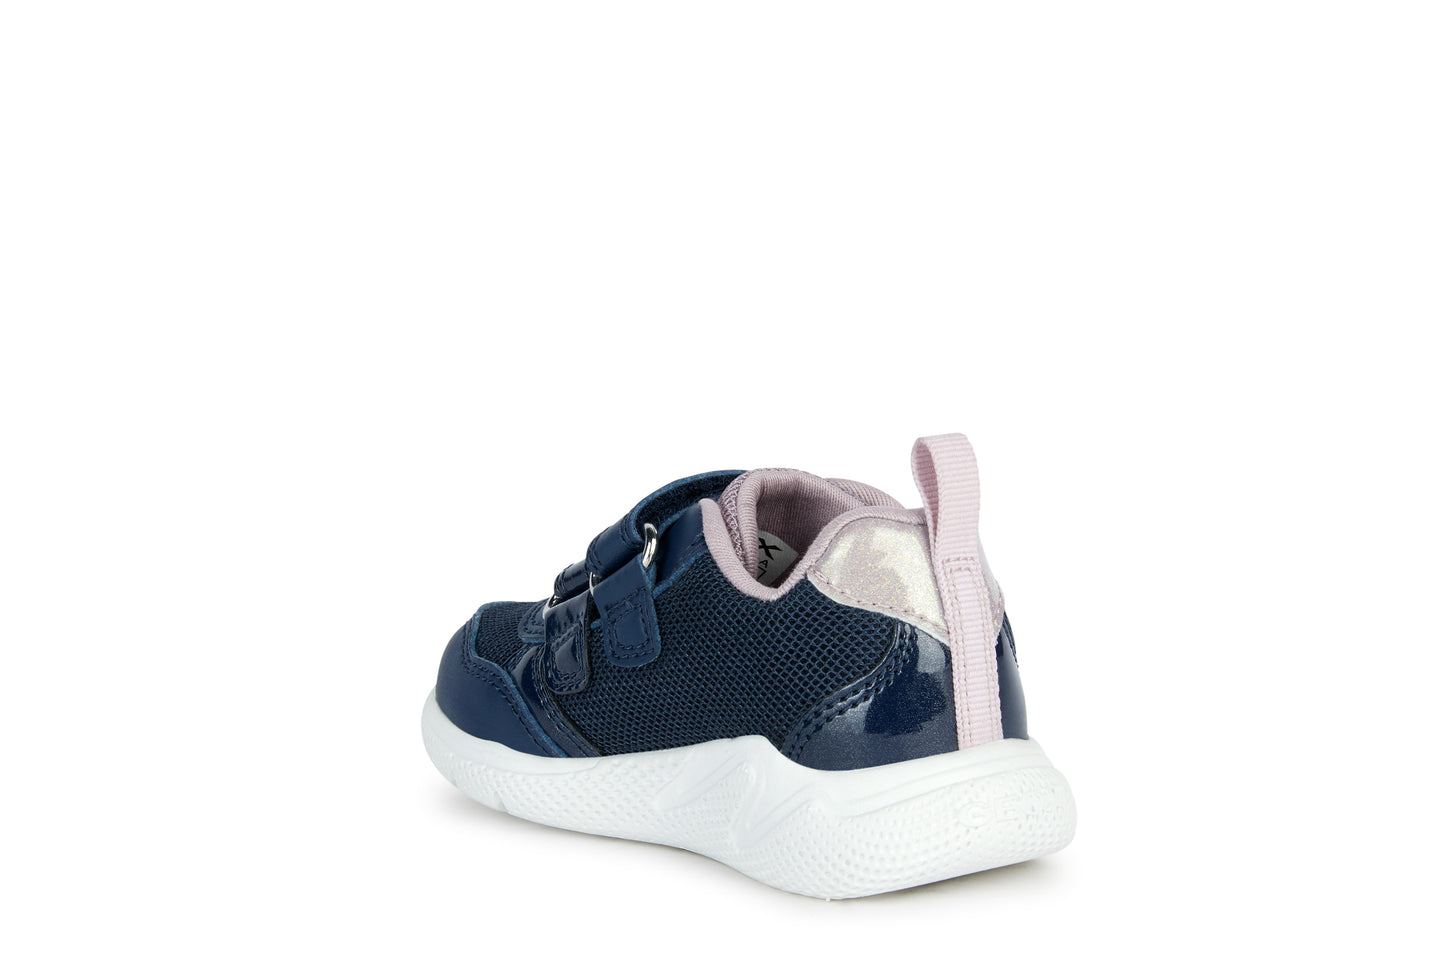 A girls trainer by Geox, style Sprintye, in navy and rose with double velcro fastening. Rear inner side view.